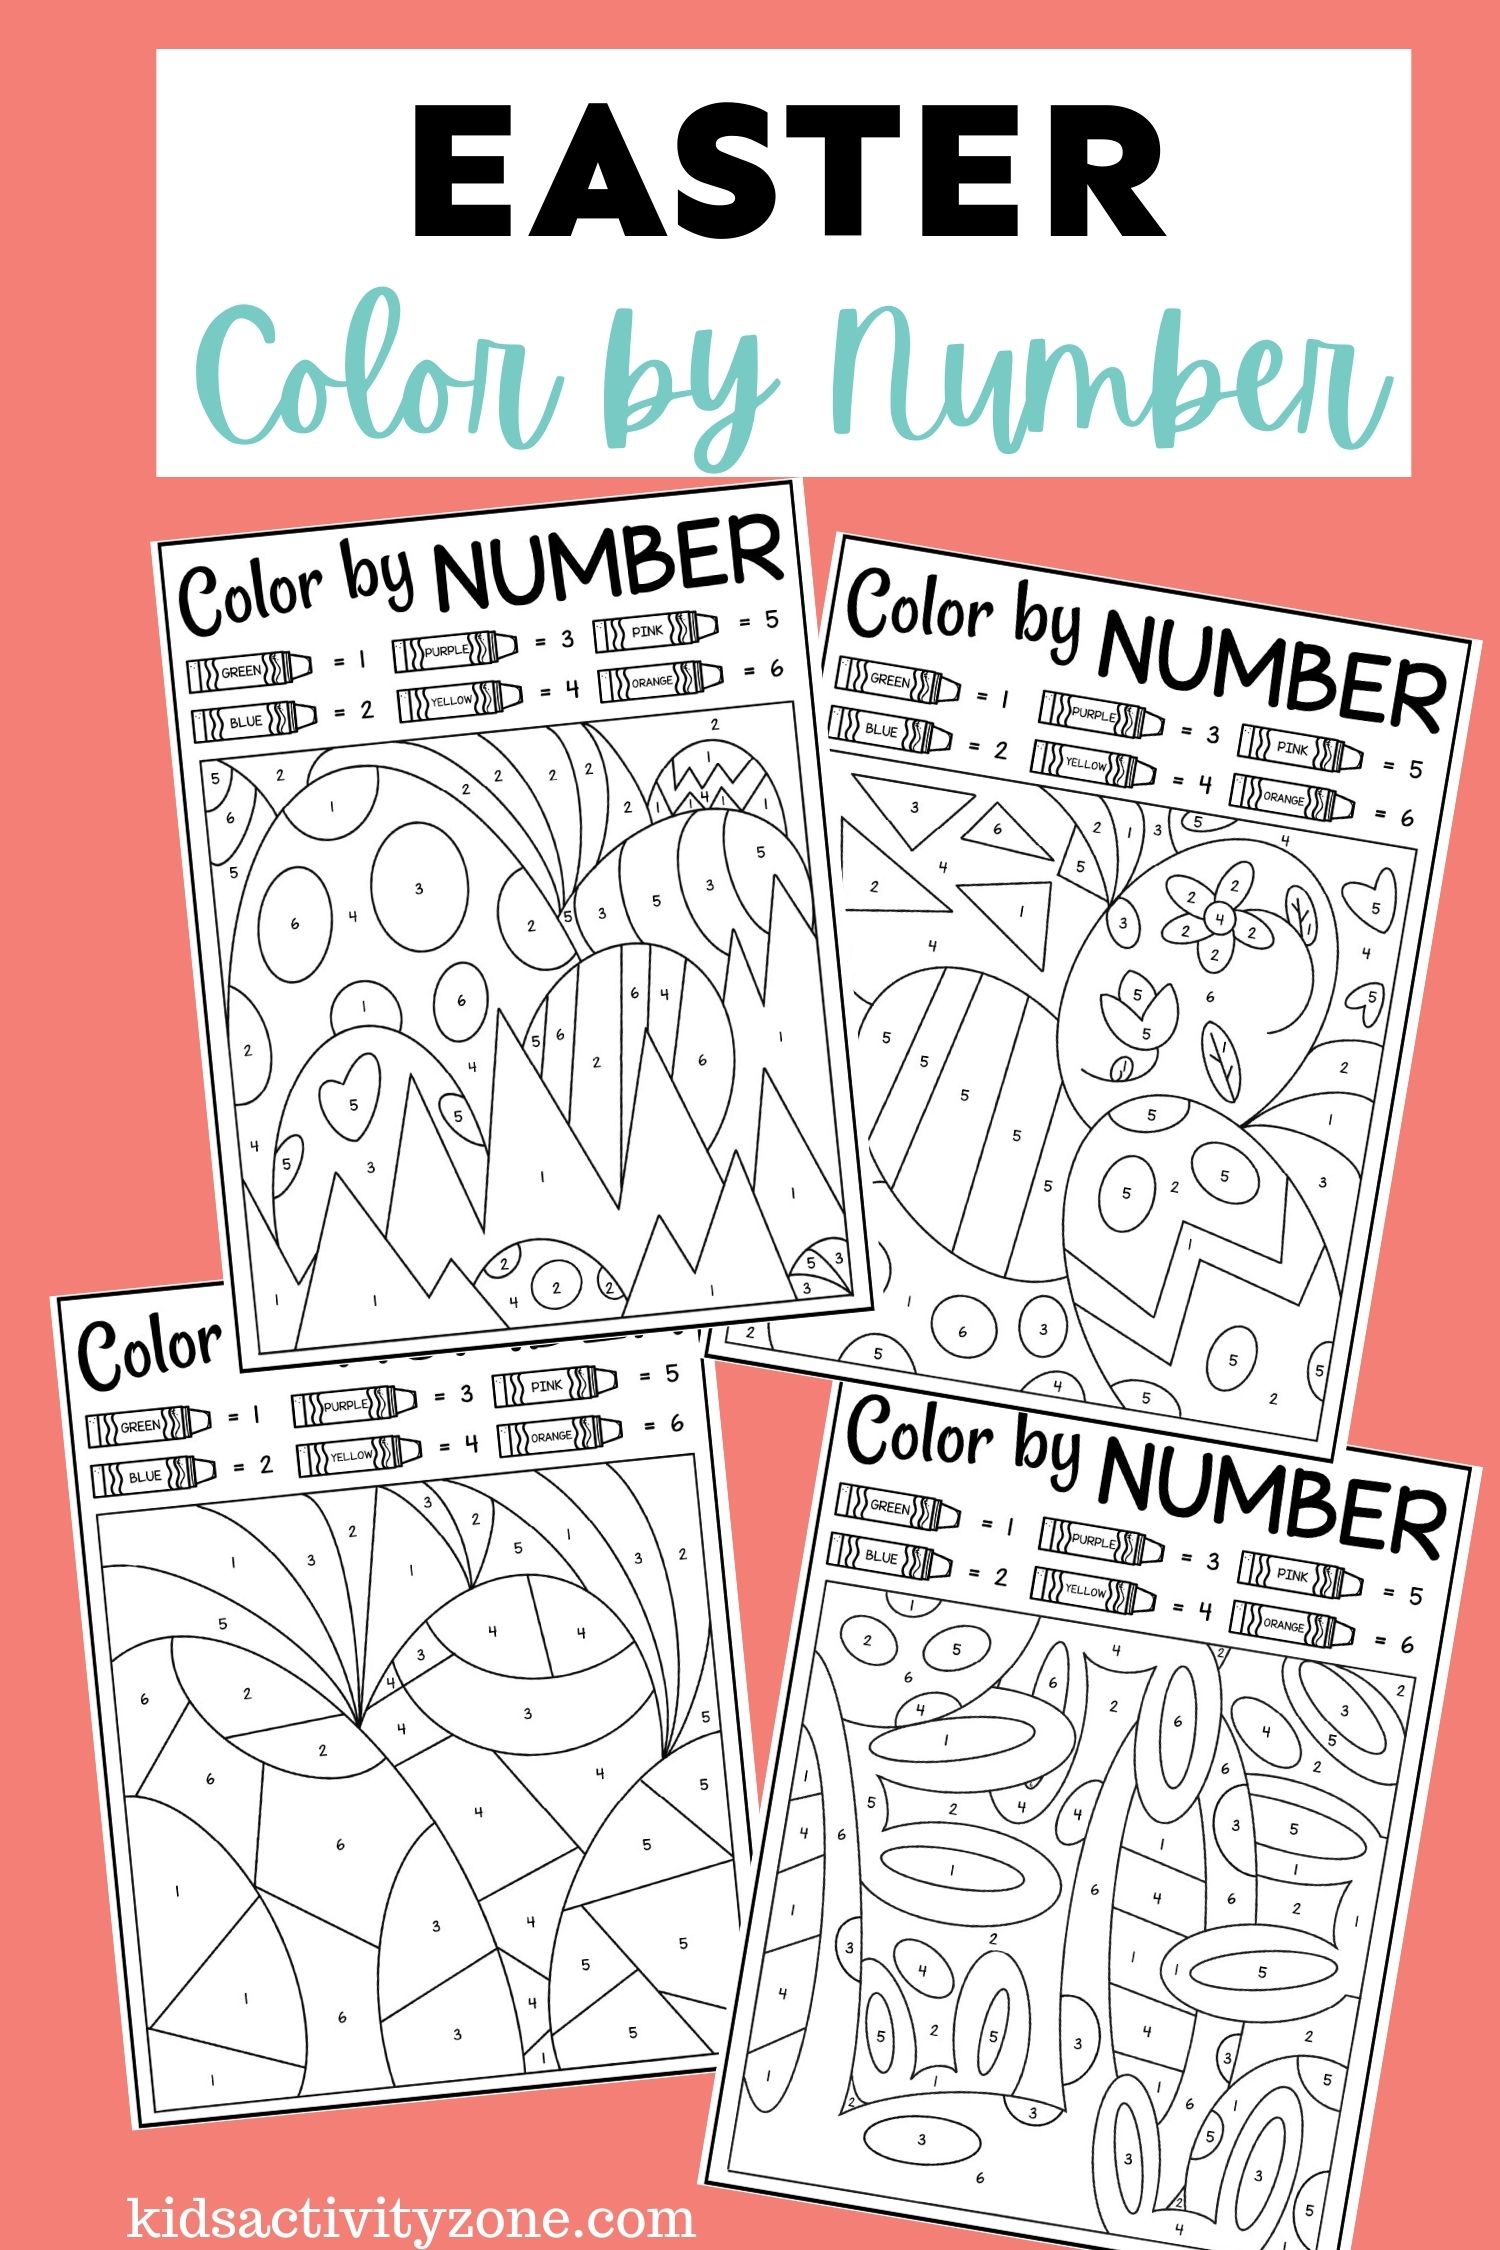 Looking for a fun way to keep your kids busy this Easter? Why not give them a color by number project! Coloring is a great activity to keep them entertained and occupied while you deal with other chores. 